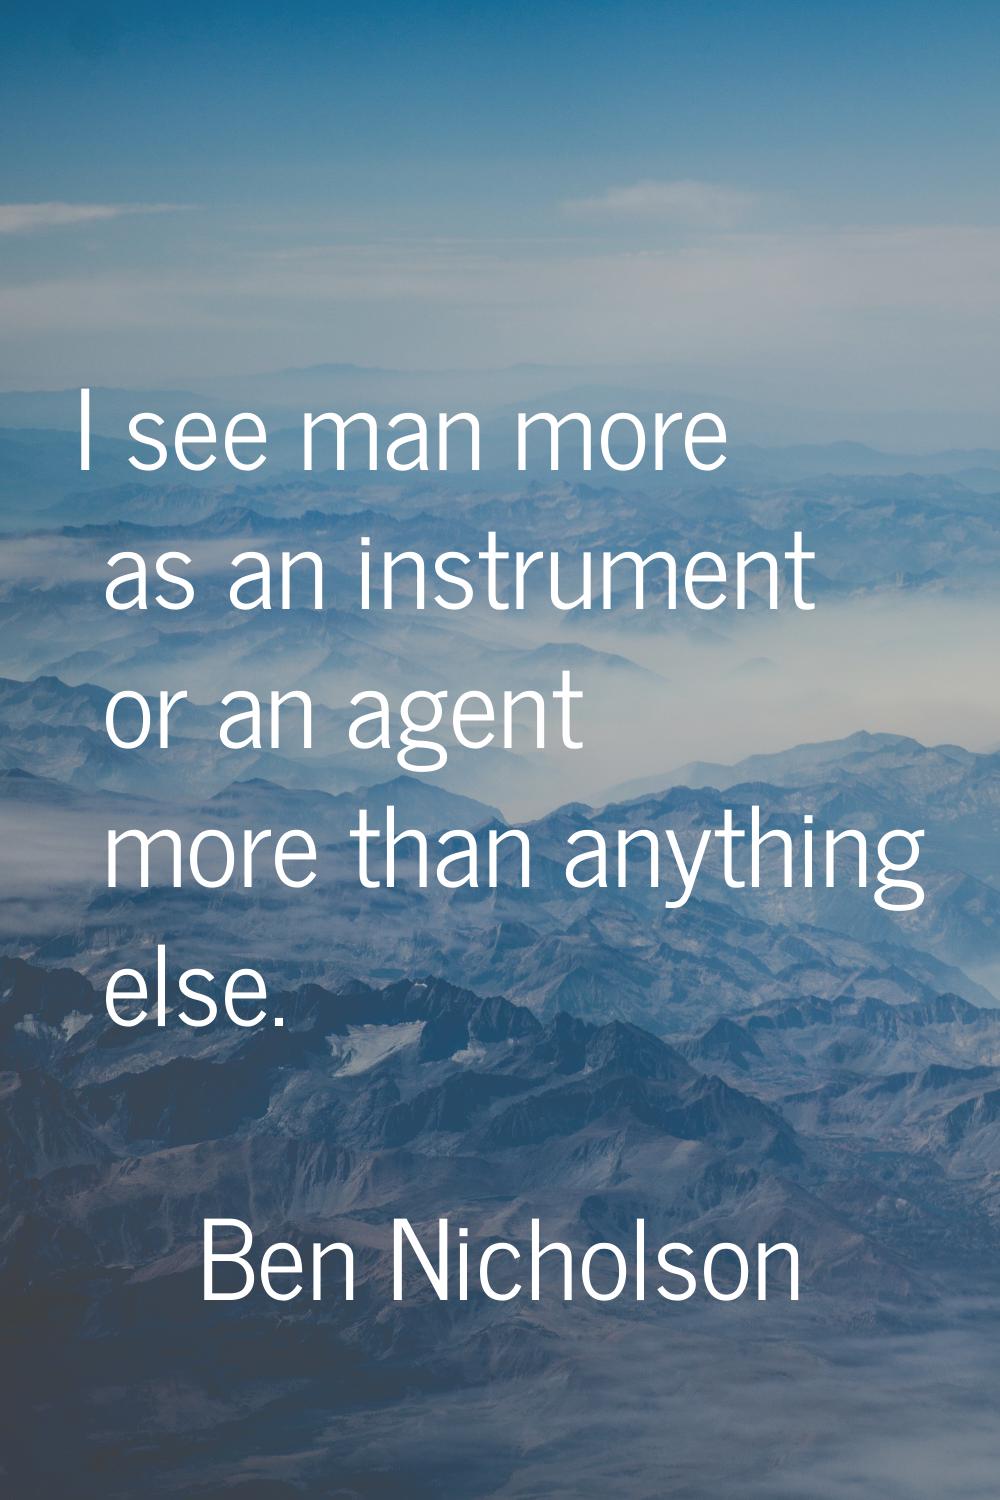 I see man more as an instrument or an agent more than anything else.